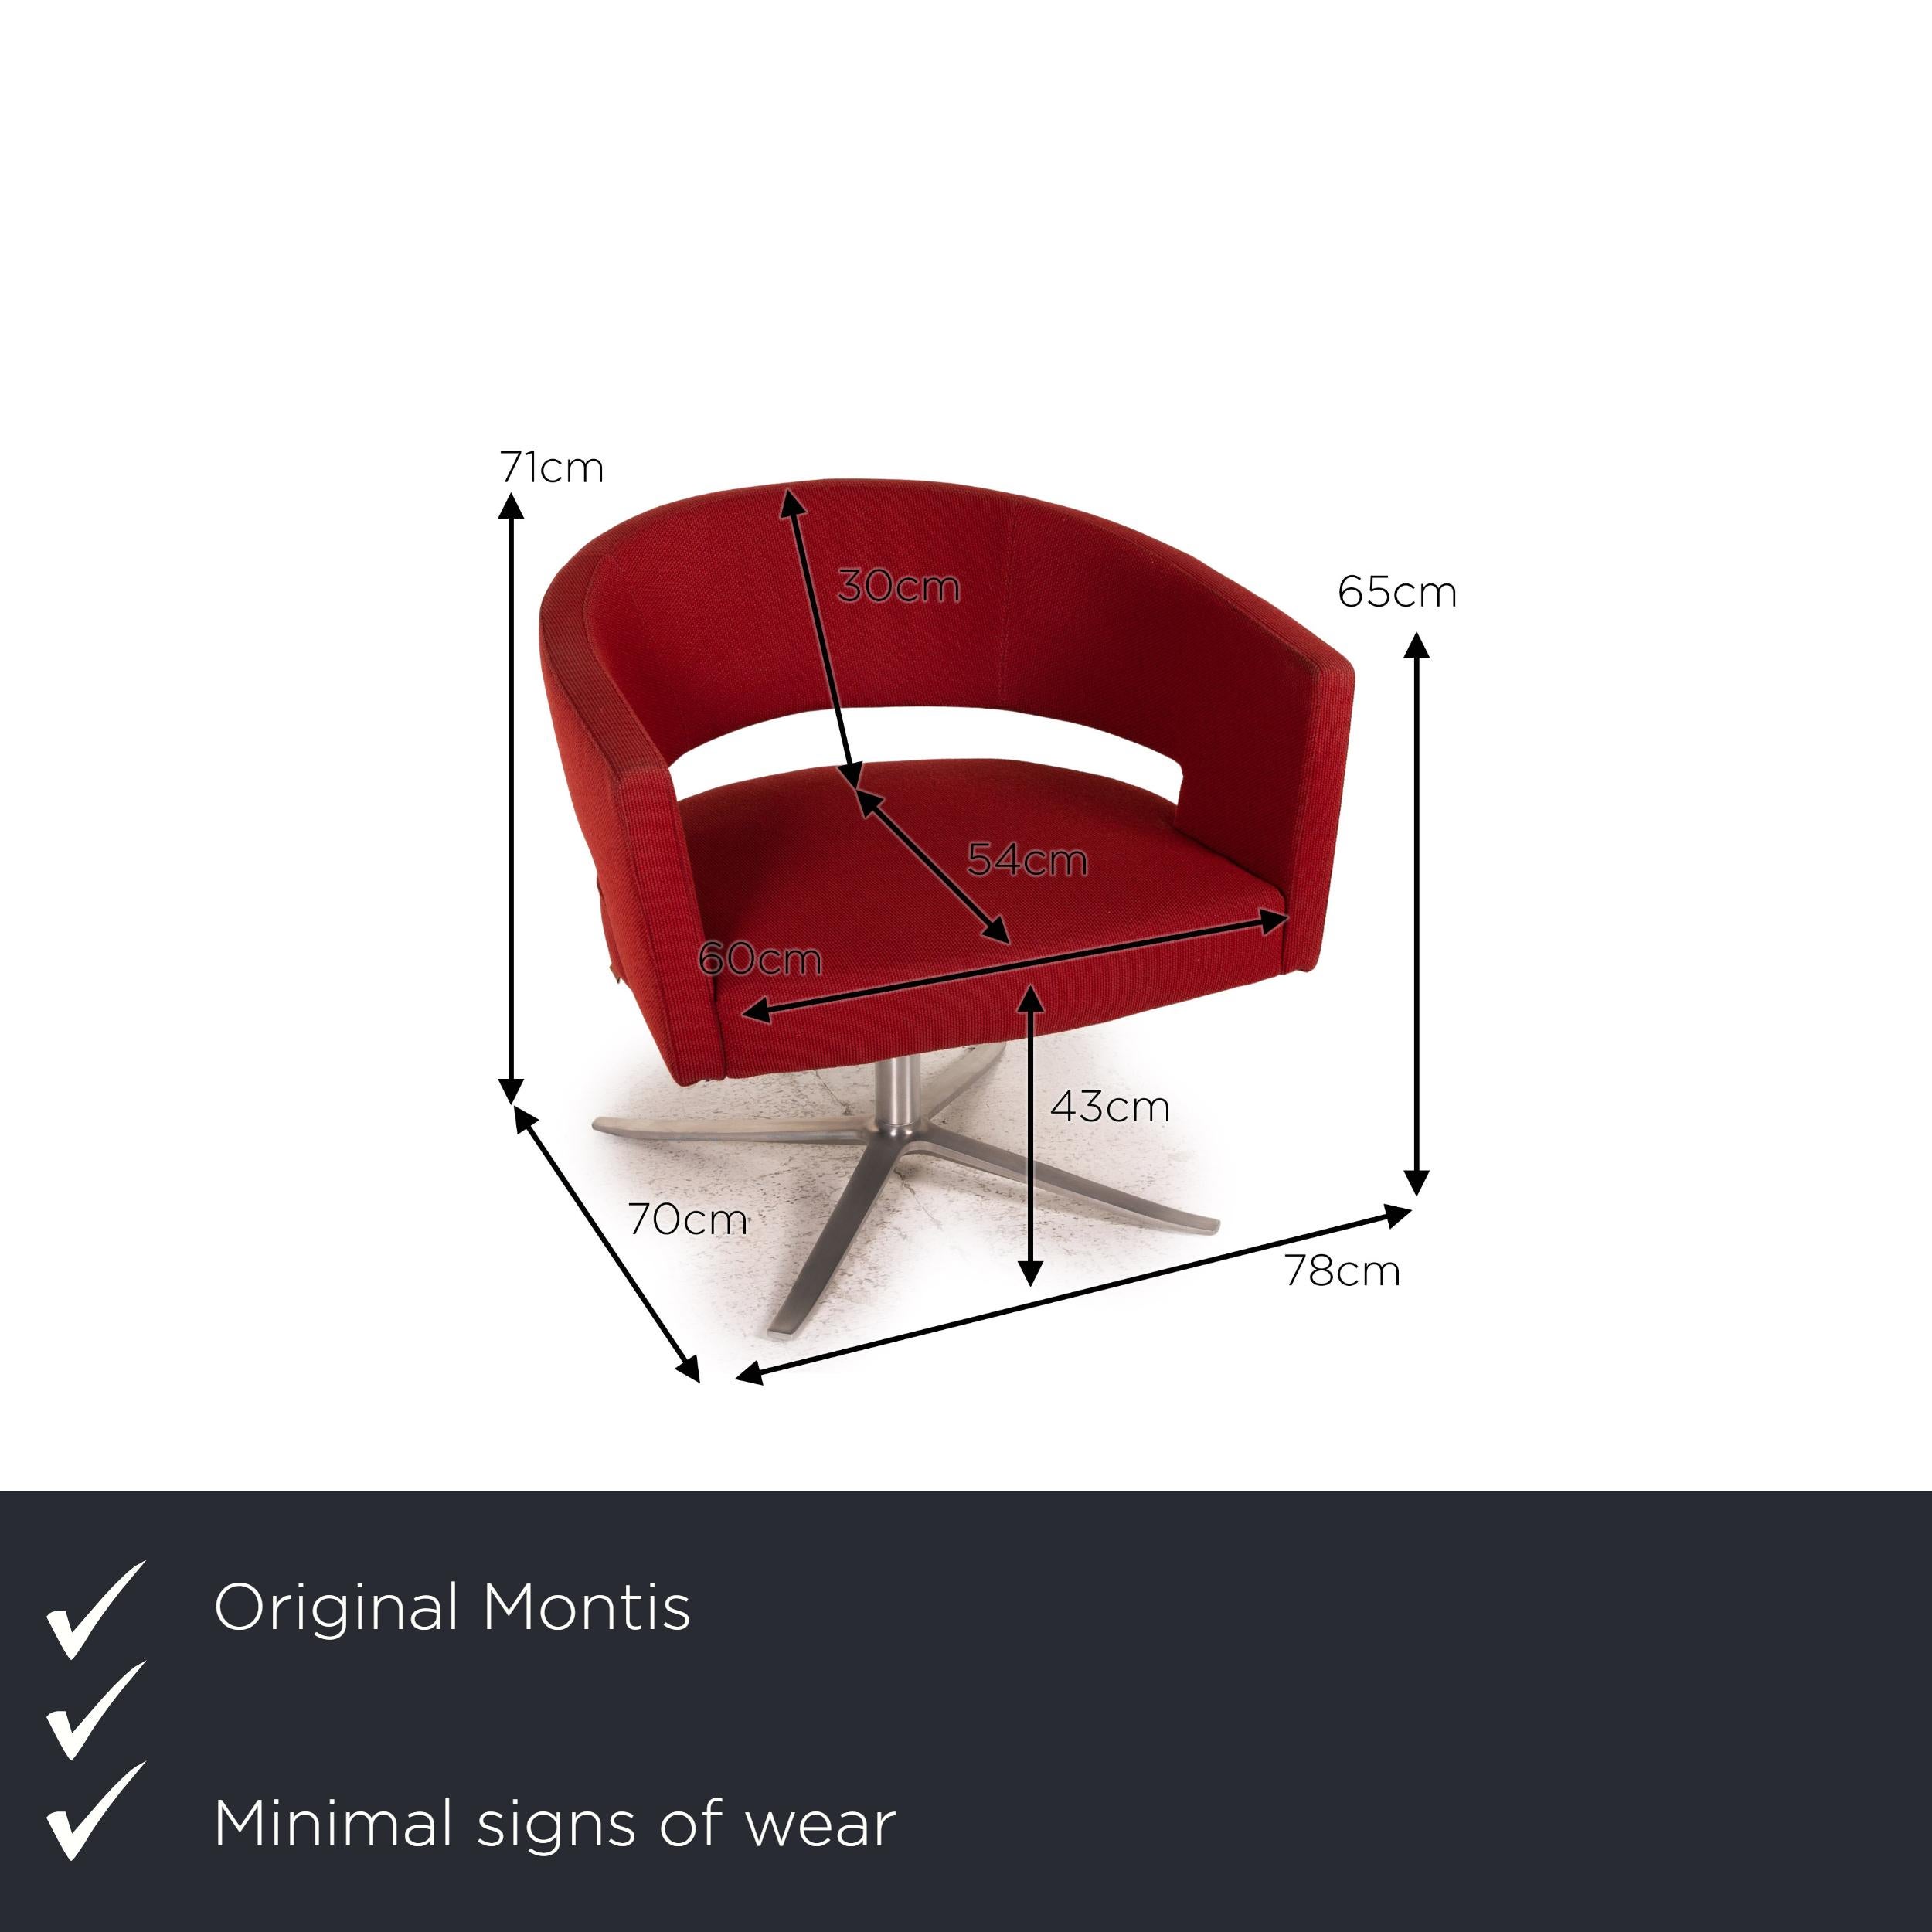 We present to you a Montis Turner fabric armchair red metal swivel.


 Product measurements in centimeters:
 

Depth: 70
Width: 78
Height: 71
Seat height: 43
Rest height: 65
Seat depth: 54
Seat width: 60
Back height: 30.
 